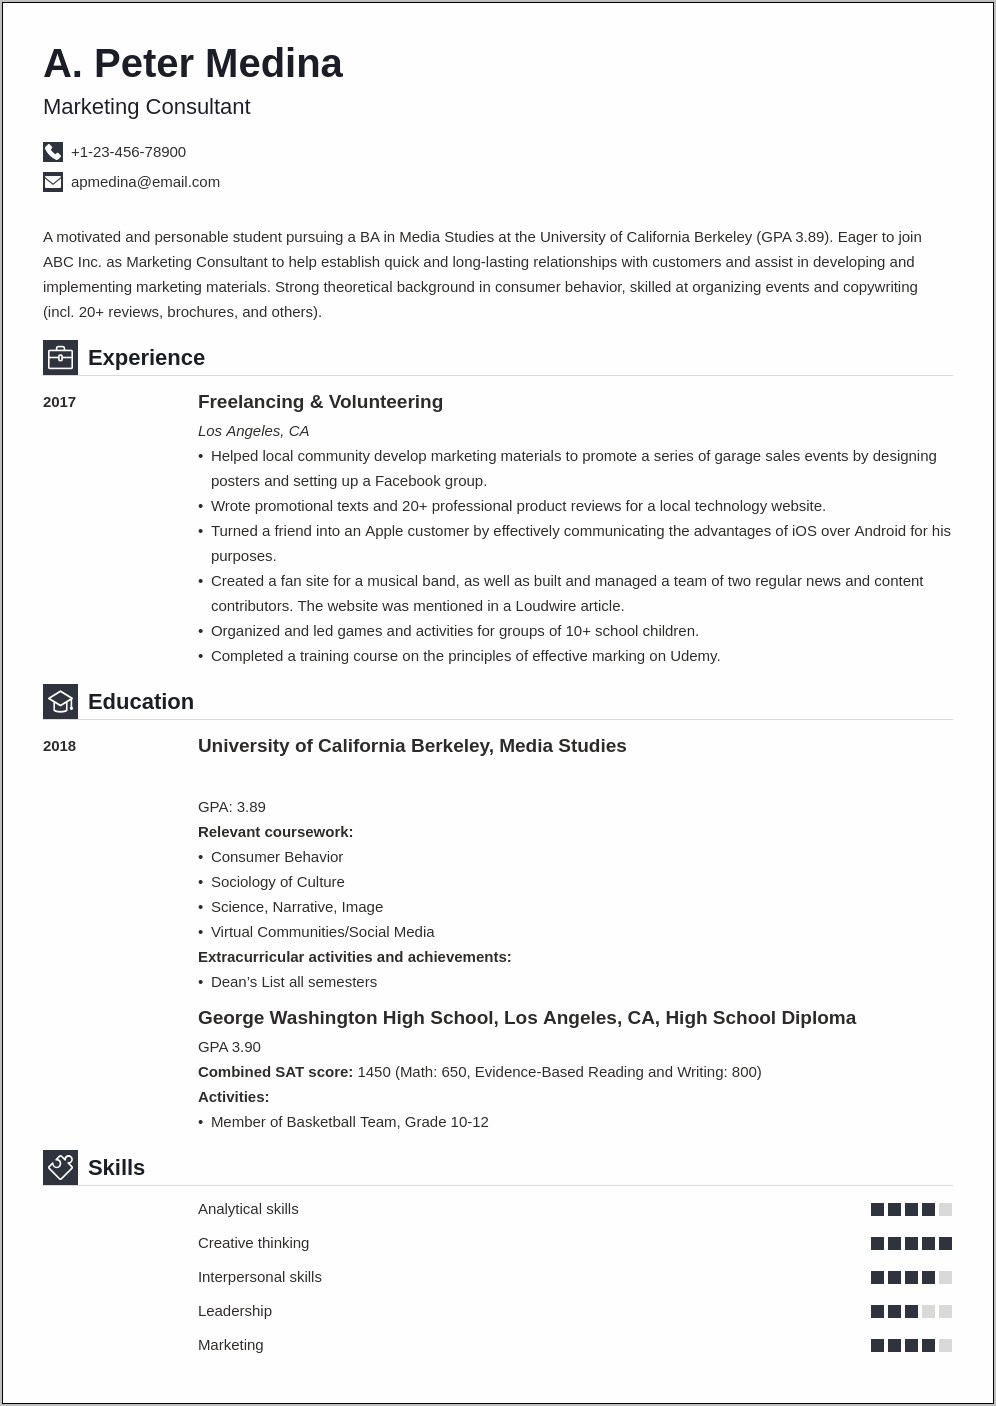 Resume Format Without Job Experience